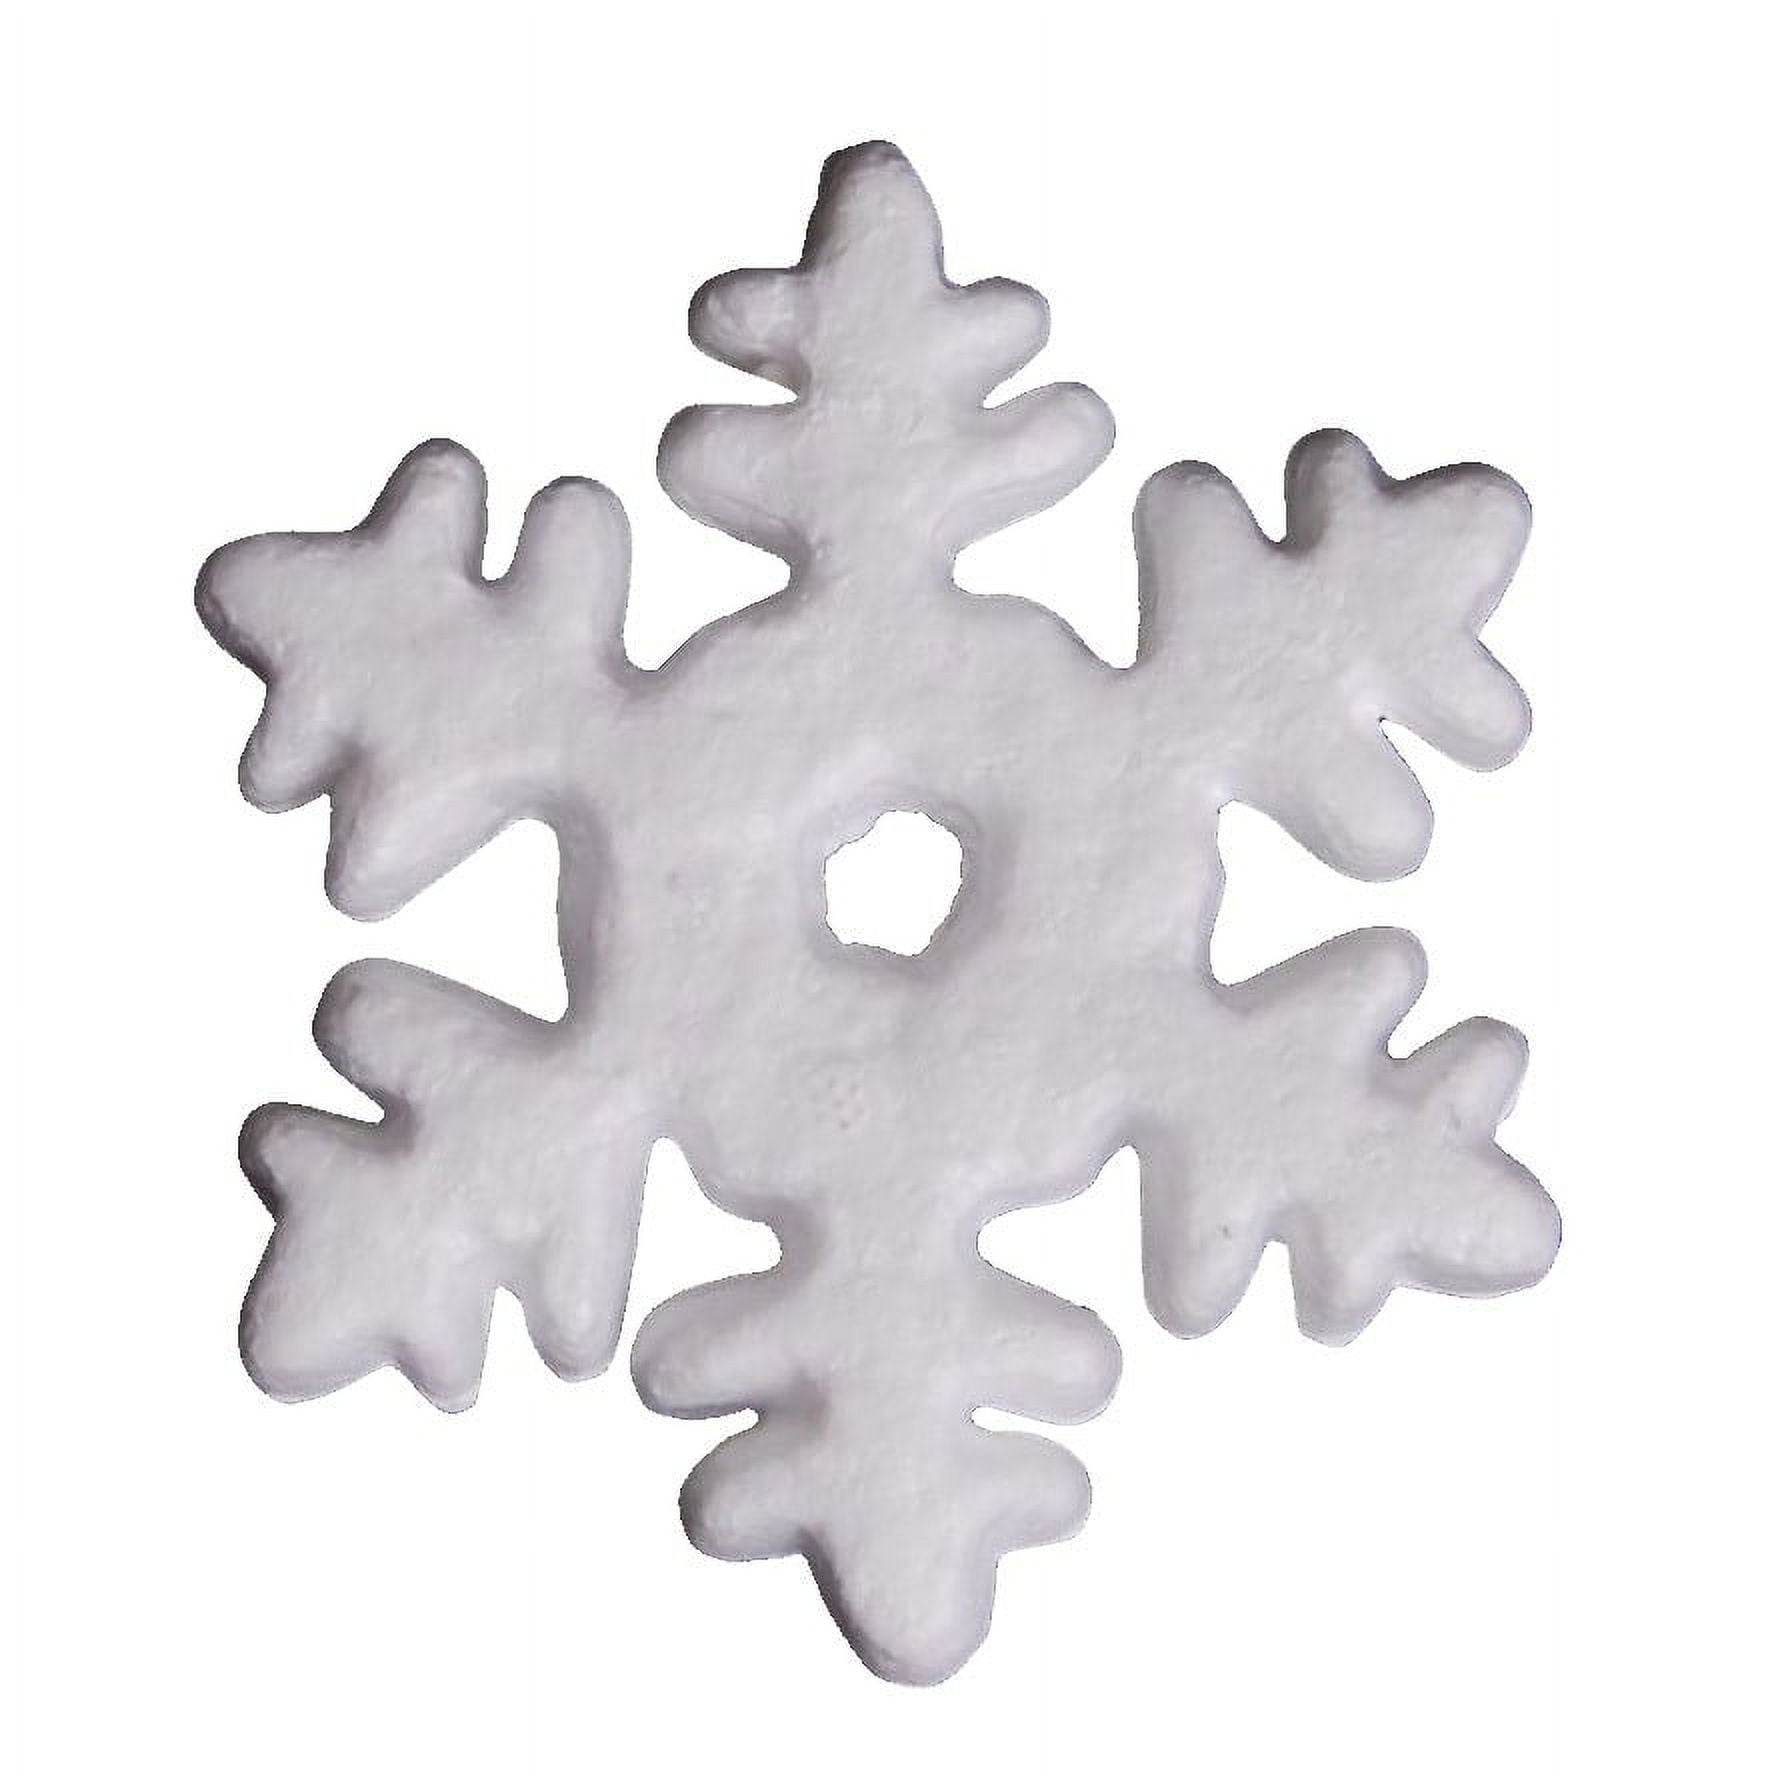 Whote Styrofoam Snowflake, Christmas Decorations, Winter Décor, Foam  Shapes, Kids Crafts, Craft Supplies, Polystyrene Shapes. DIY Projects 